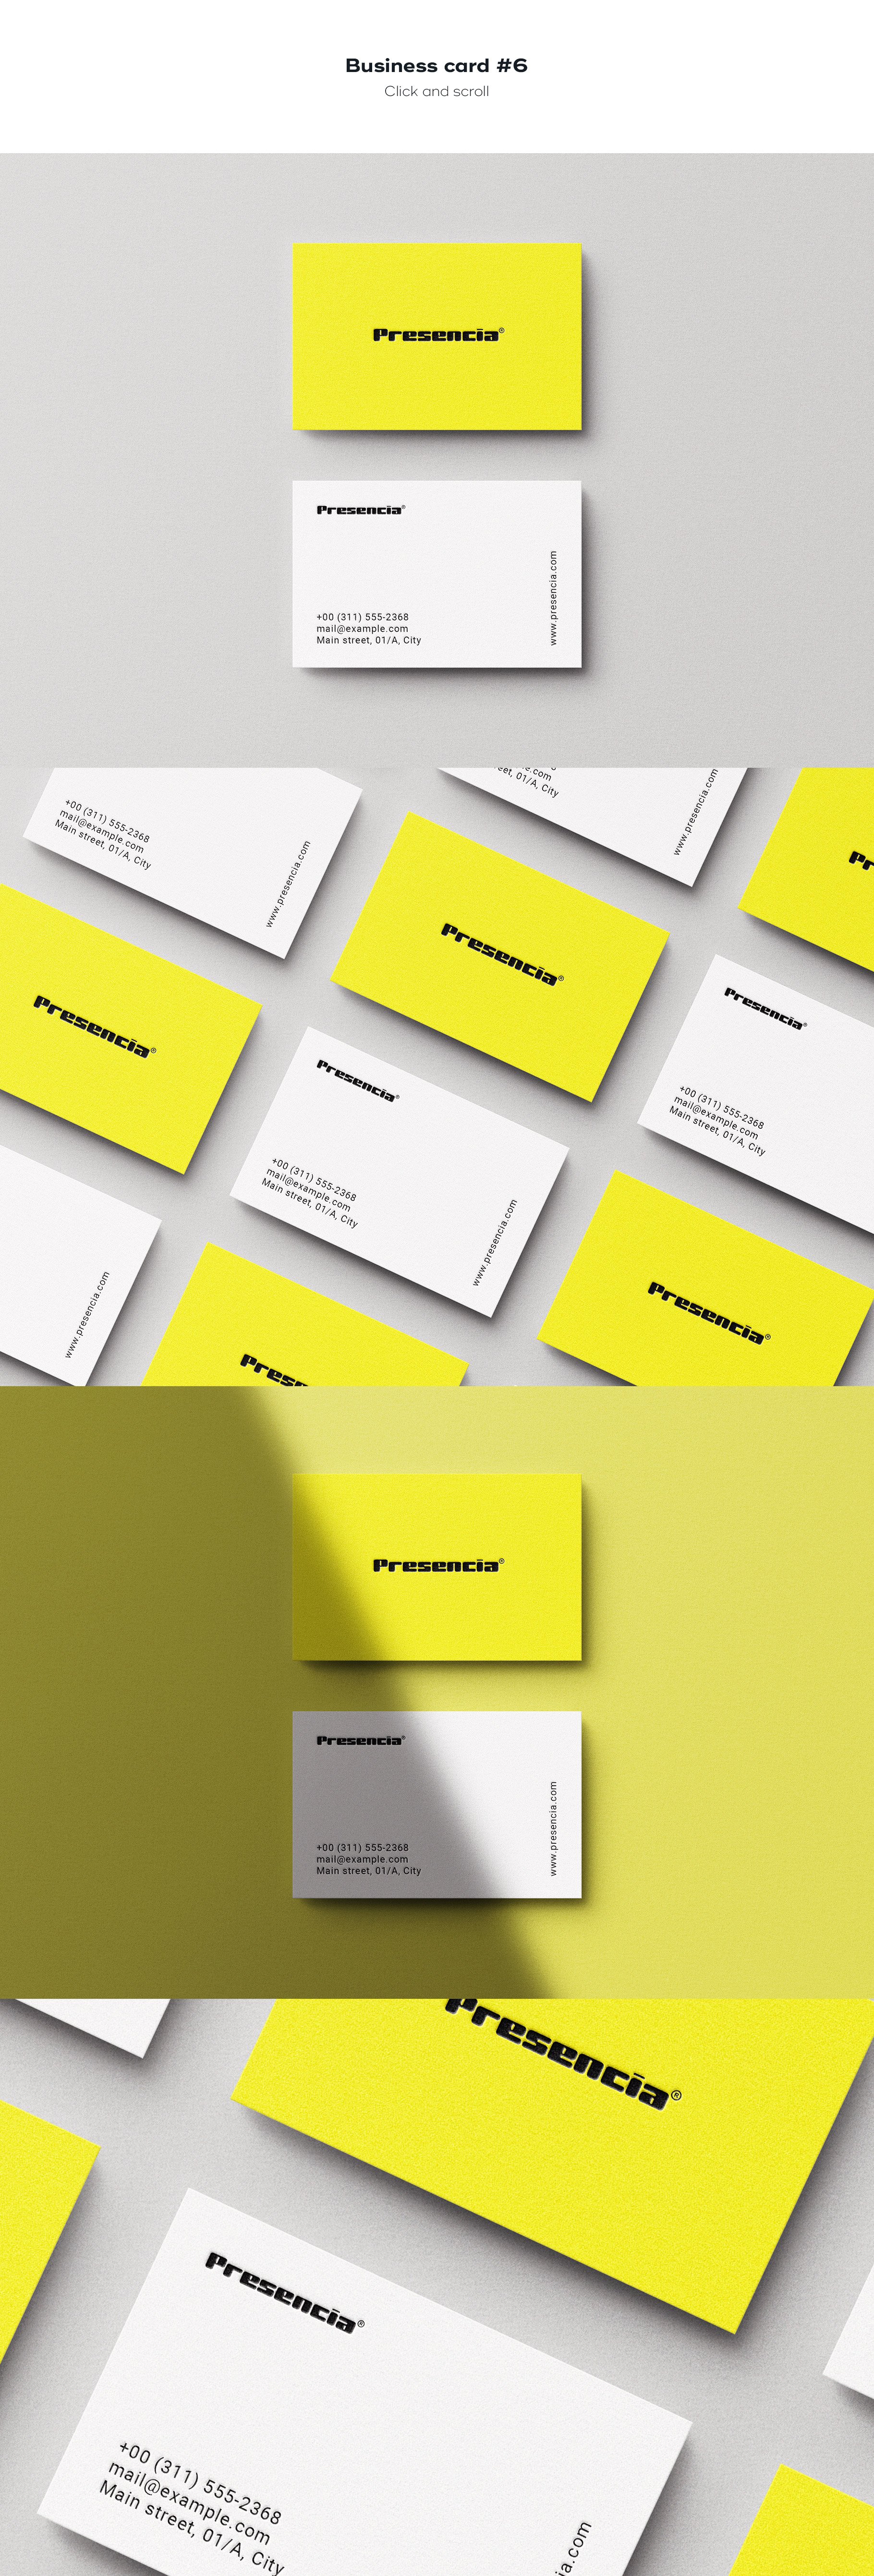 business card 6 212